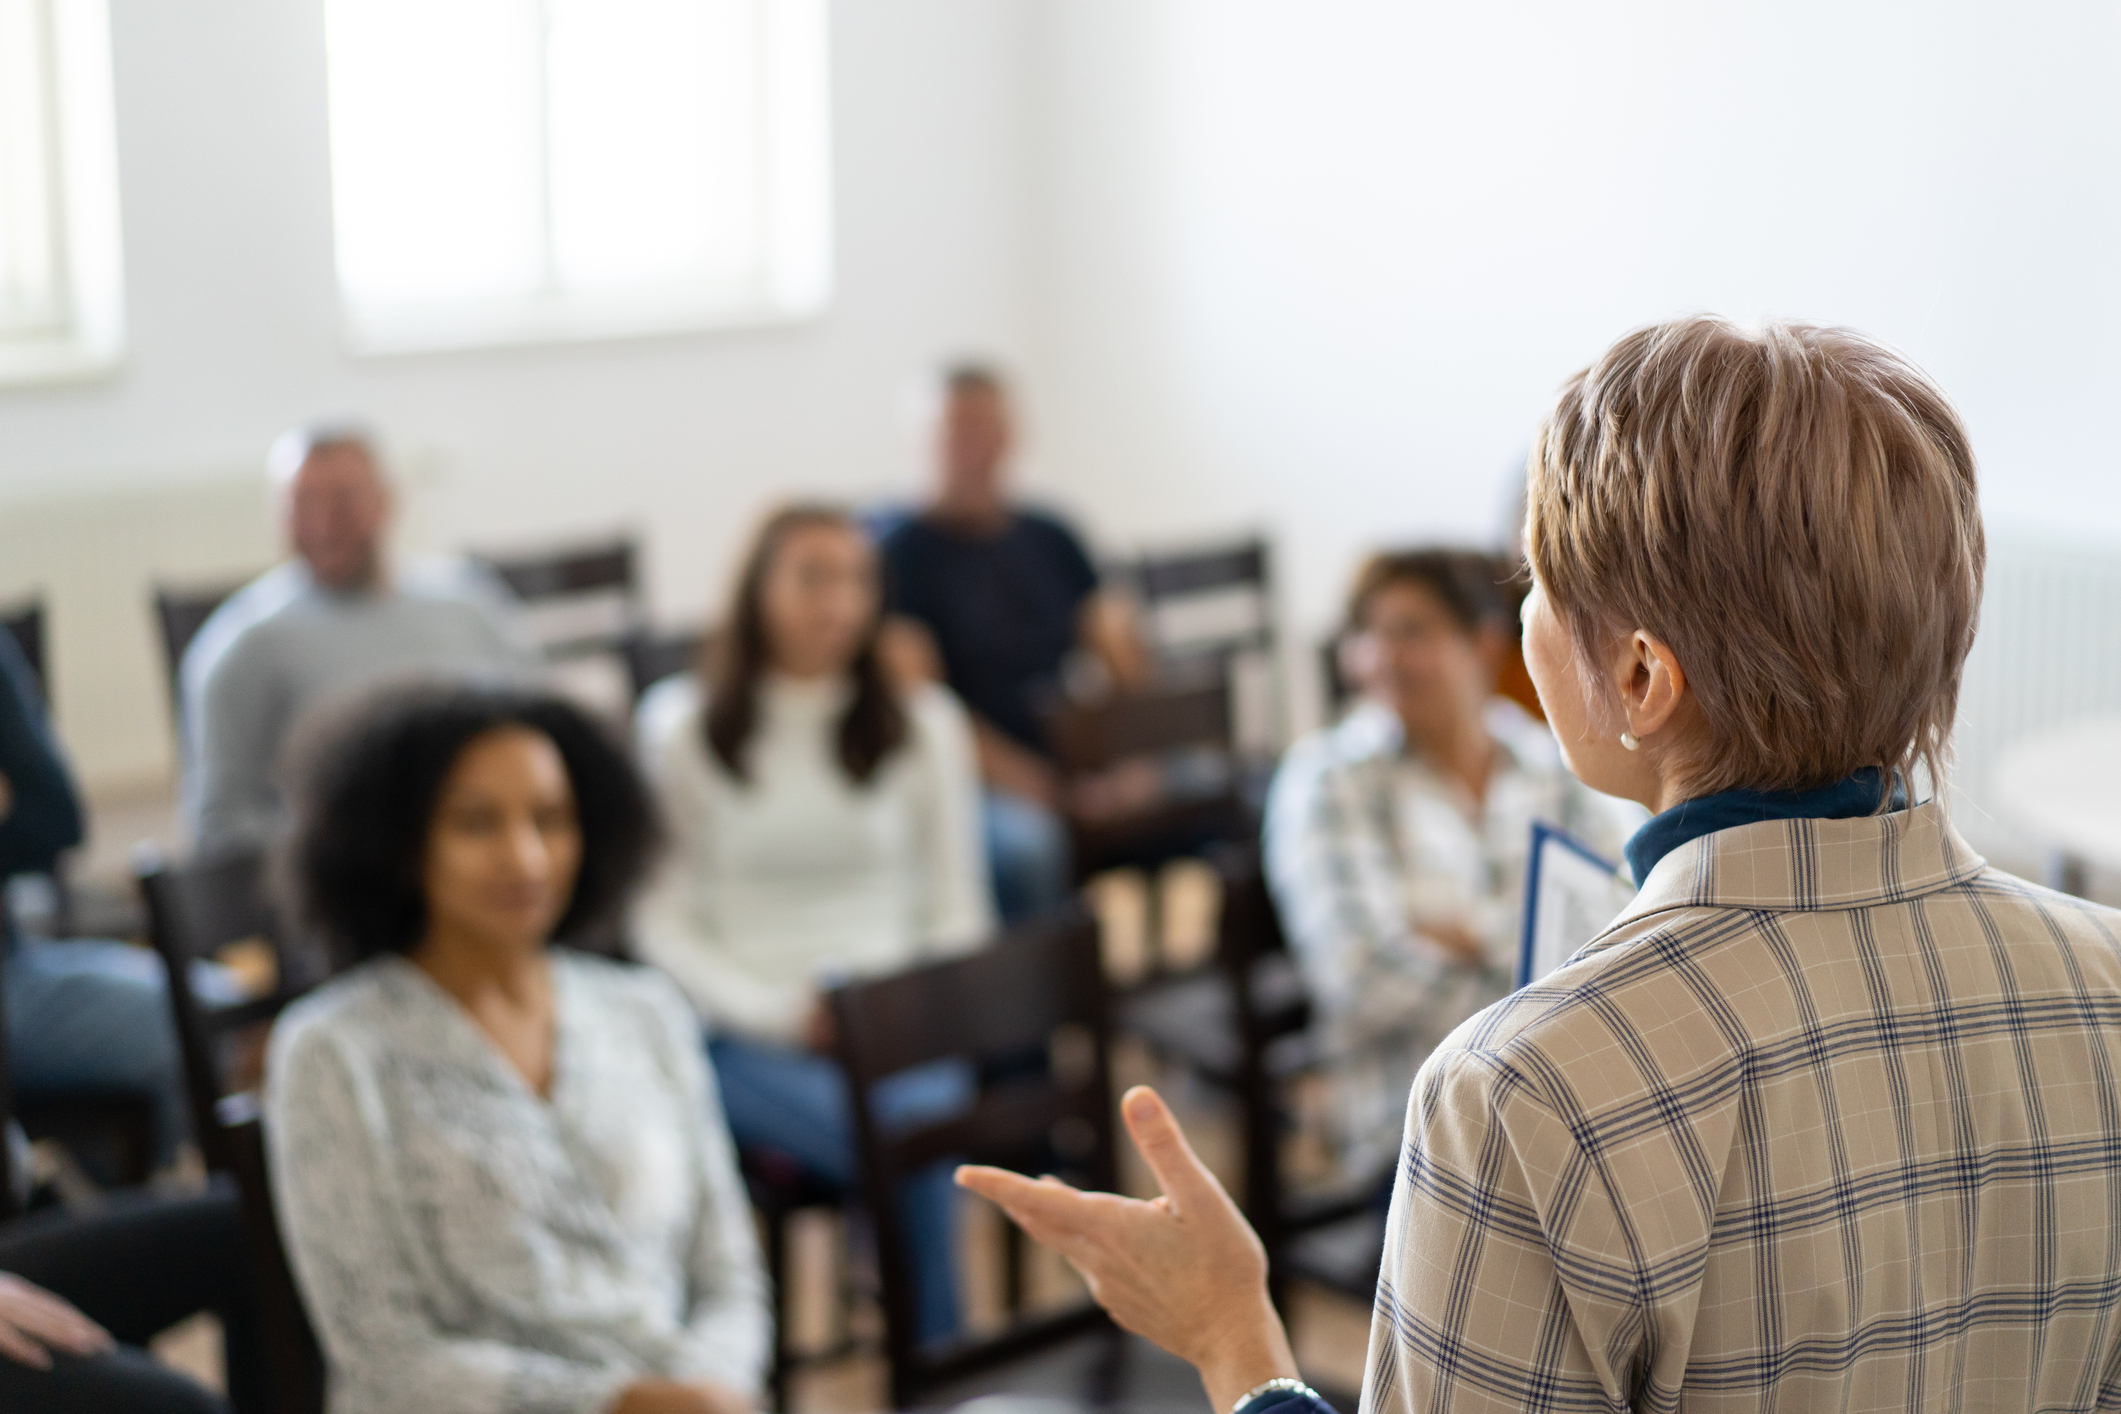 Woman standing in front of group of people presenting.